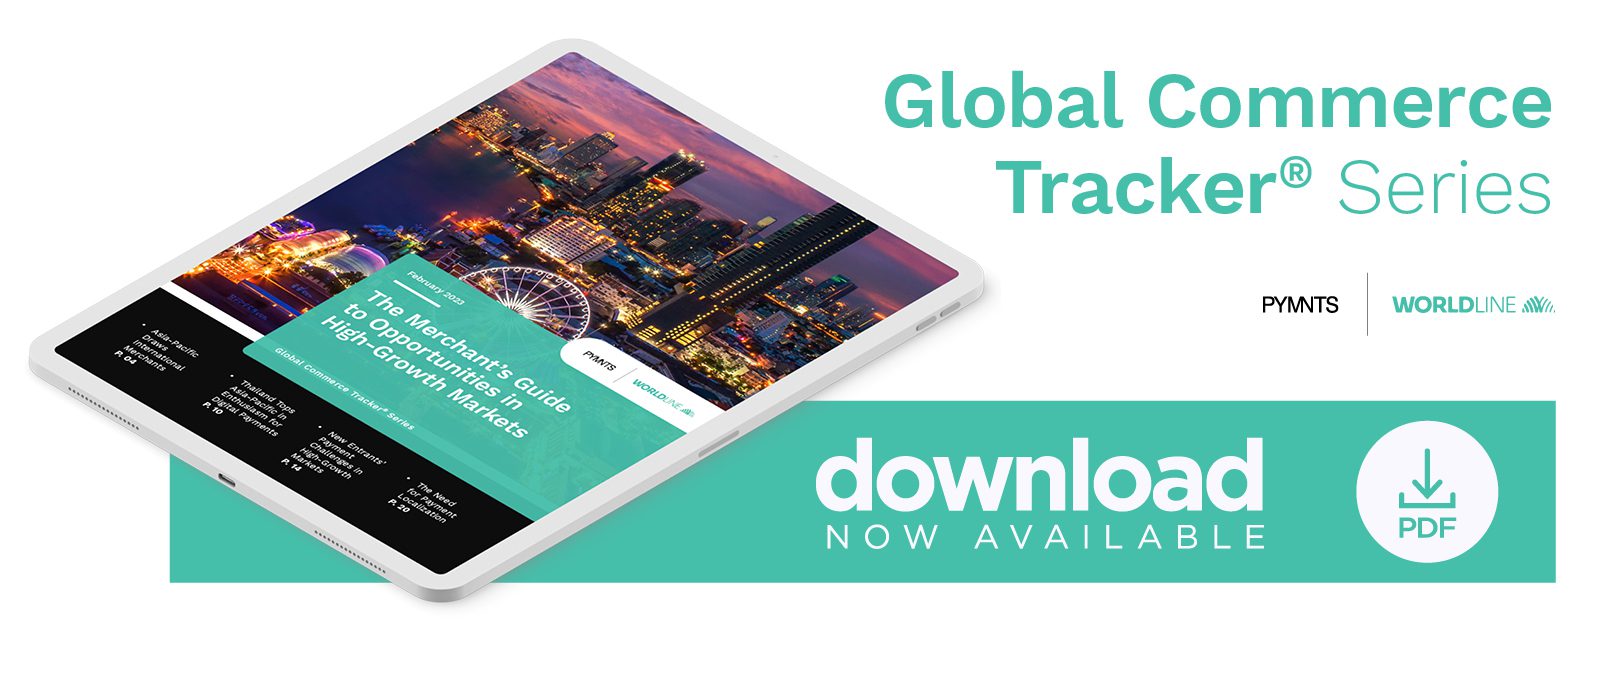 Worldline - Global Commerce Tracker: The Merchant's Guide to Opportunities in High-Growth Markets - February 2023 - Learn about the latest developments in high-growth markets and why merchants must leverage local payment options to gain customers and revenue